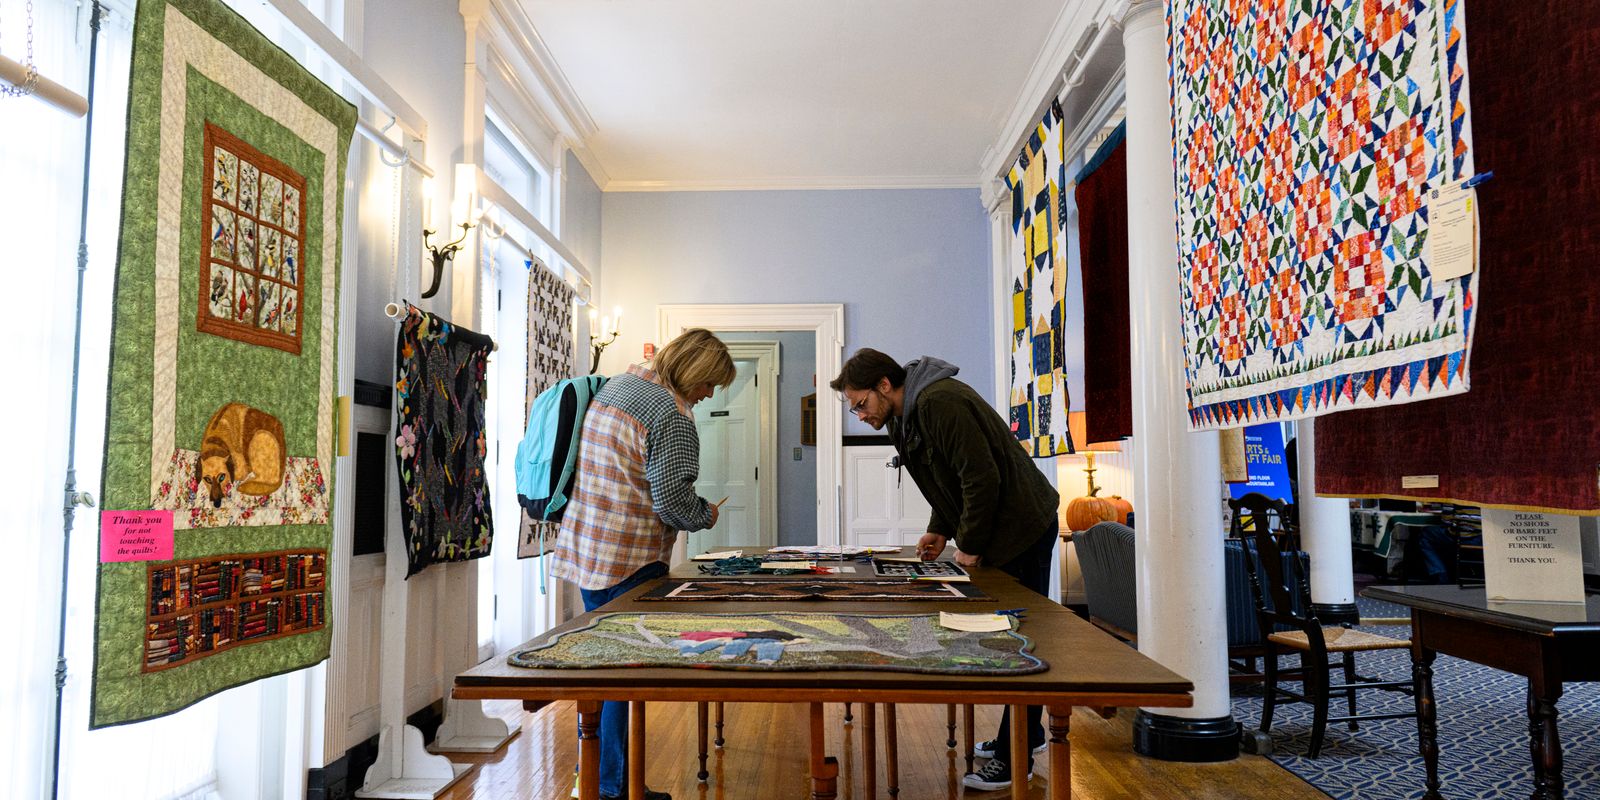 two people look at items on table, quilts hang in background